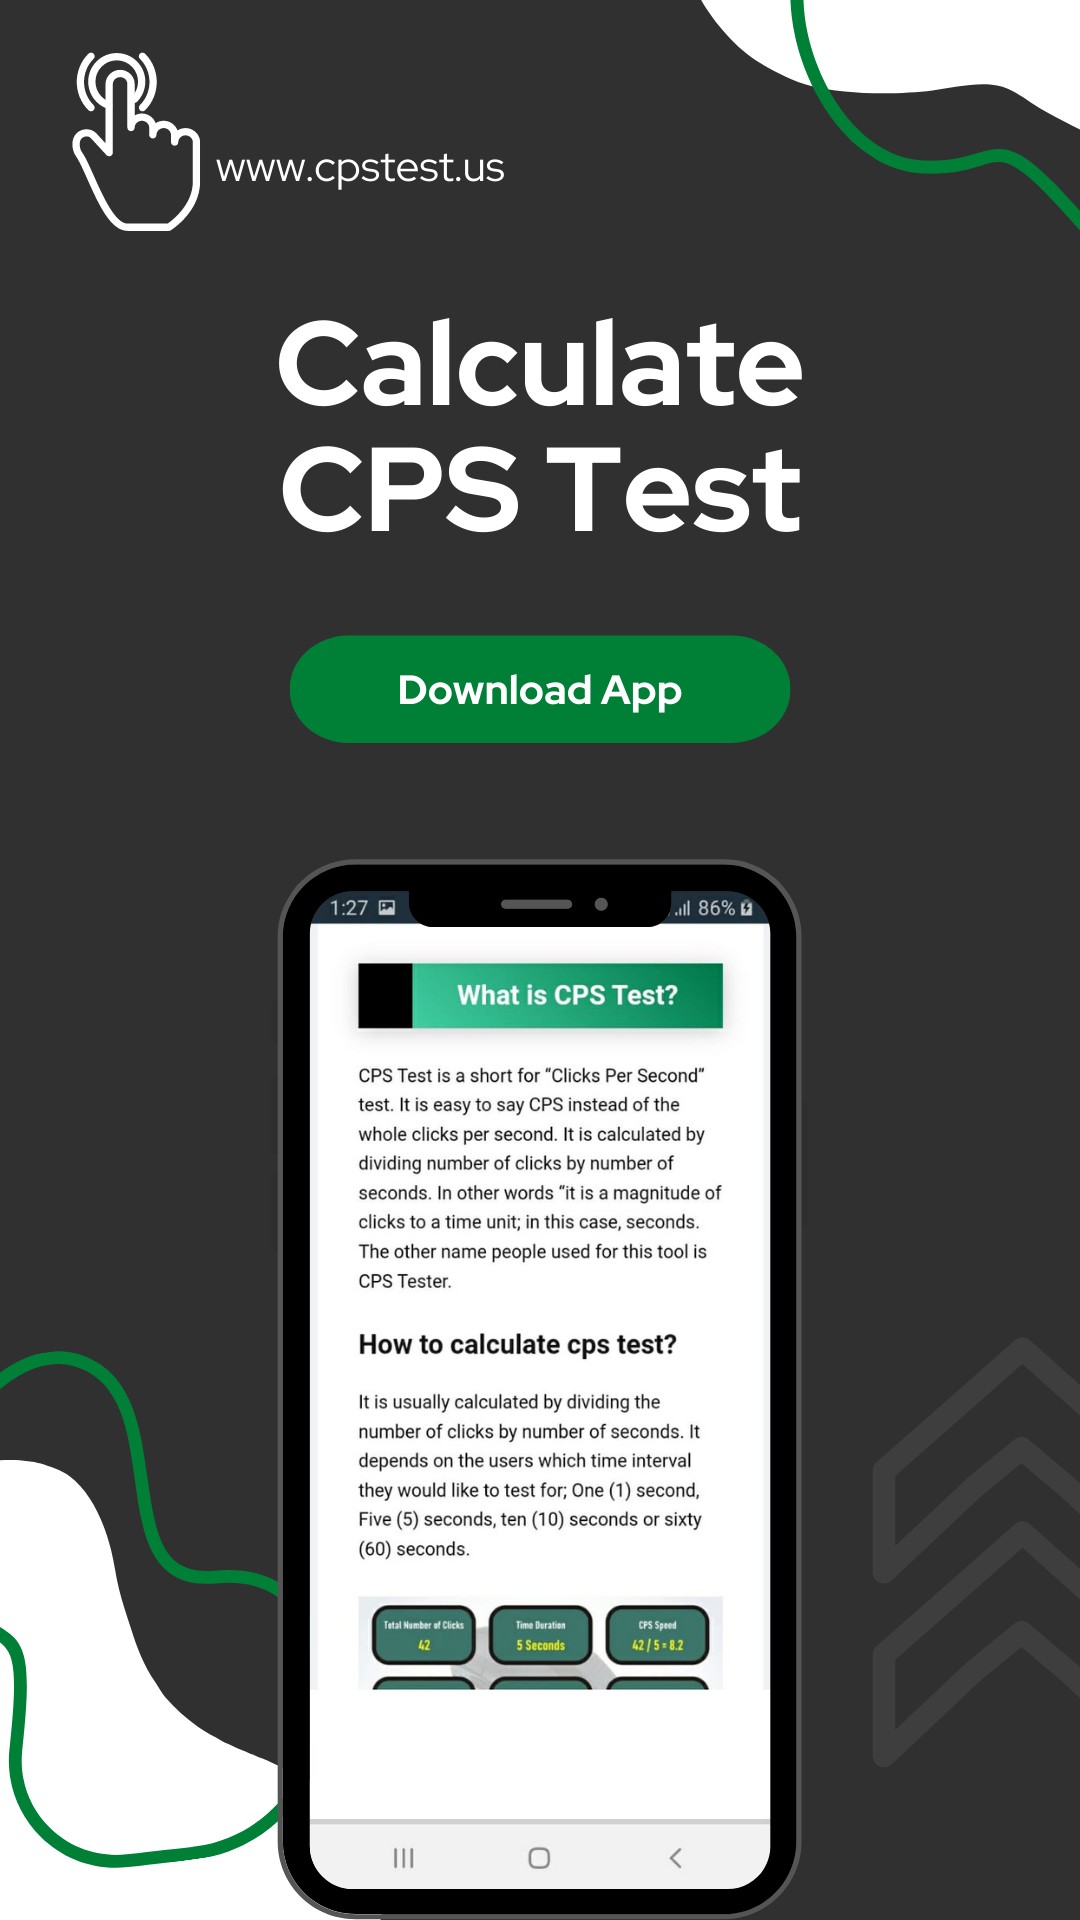 Cps Test Reviews  Read Customer Service Reviews of cps-test.io